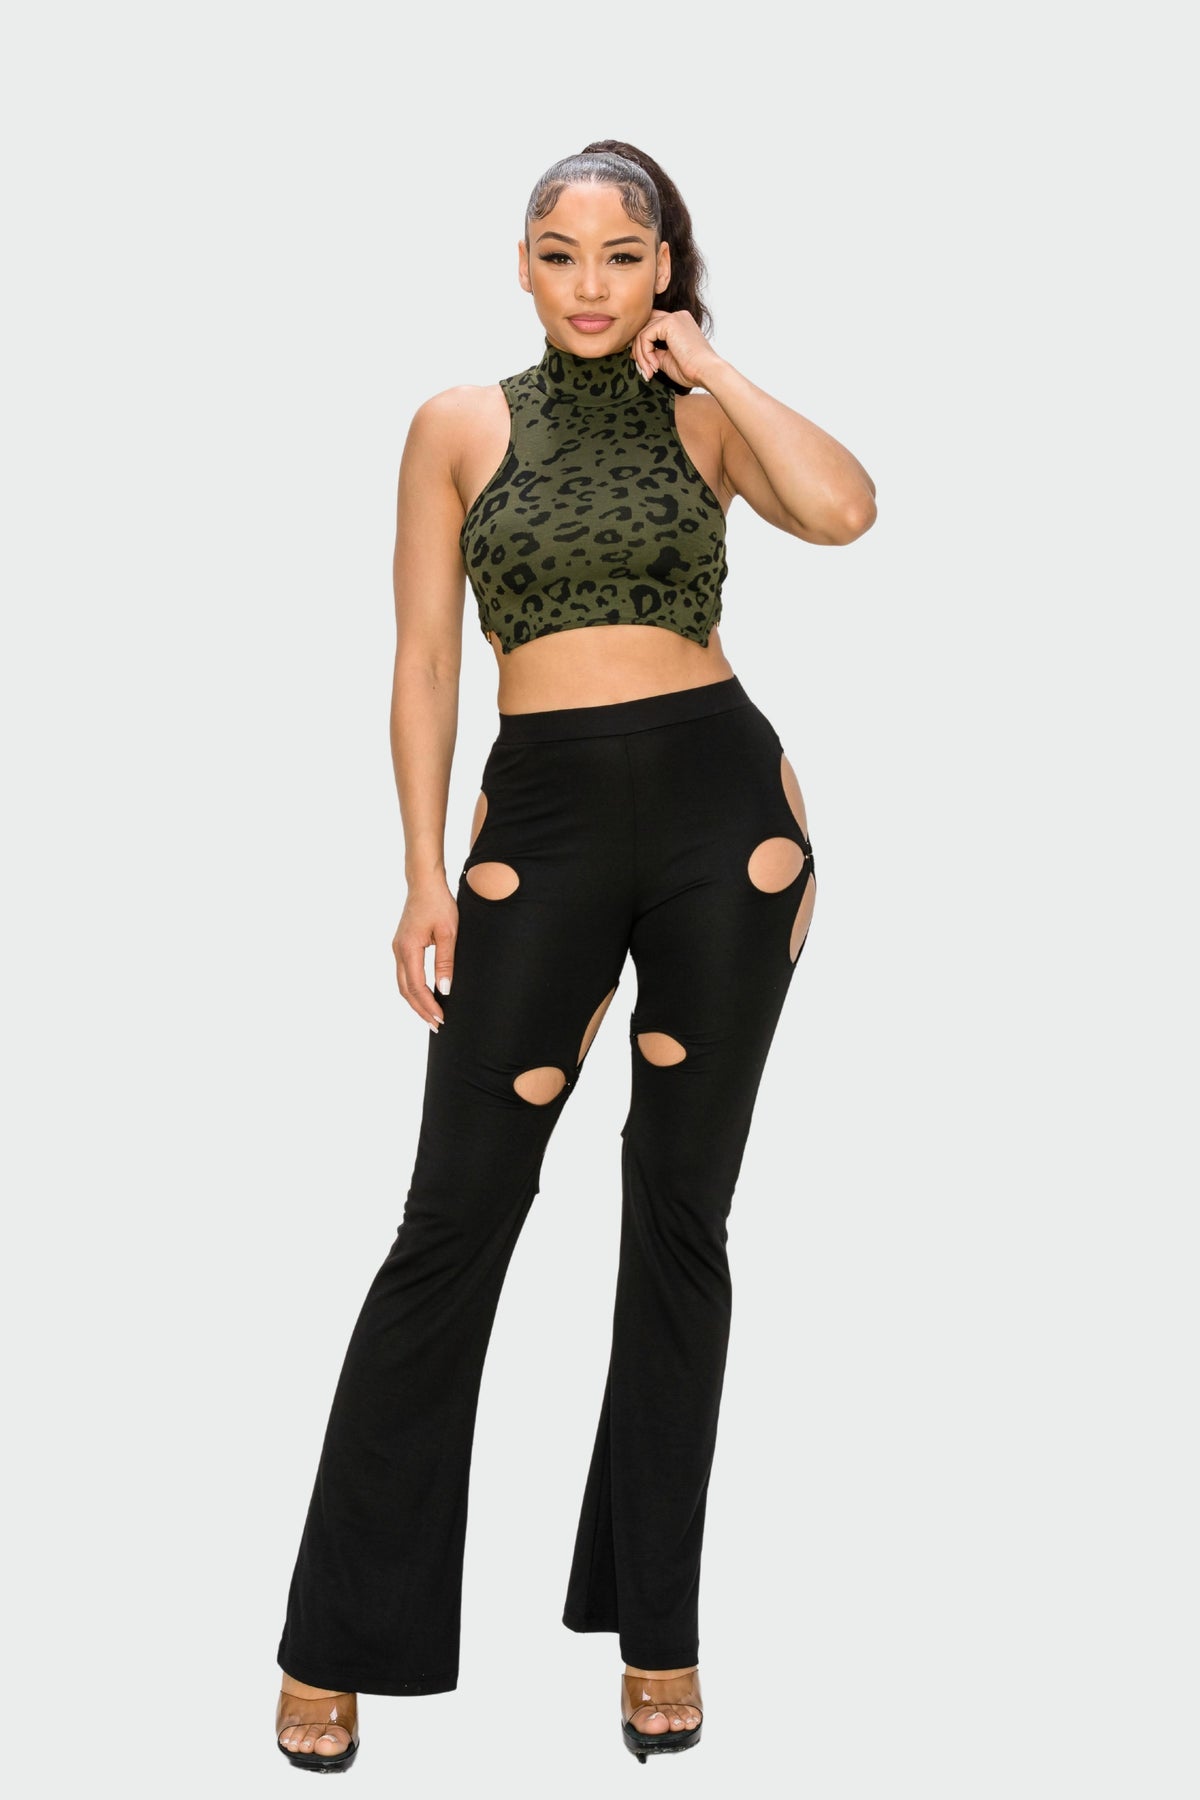 Khaki and Black Leopard Printed O-Ring Crop Top